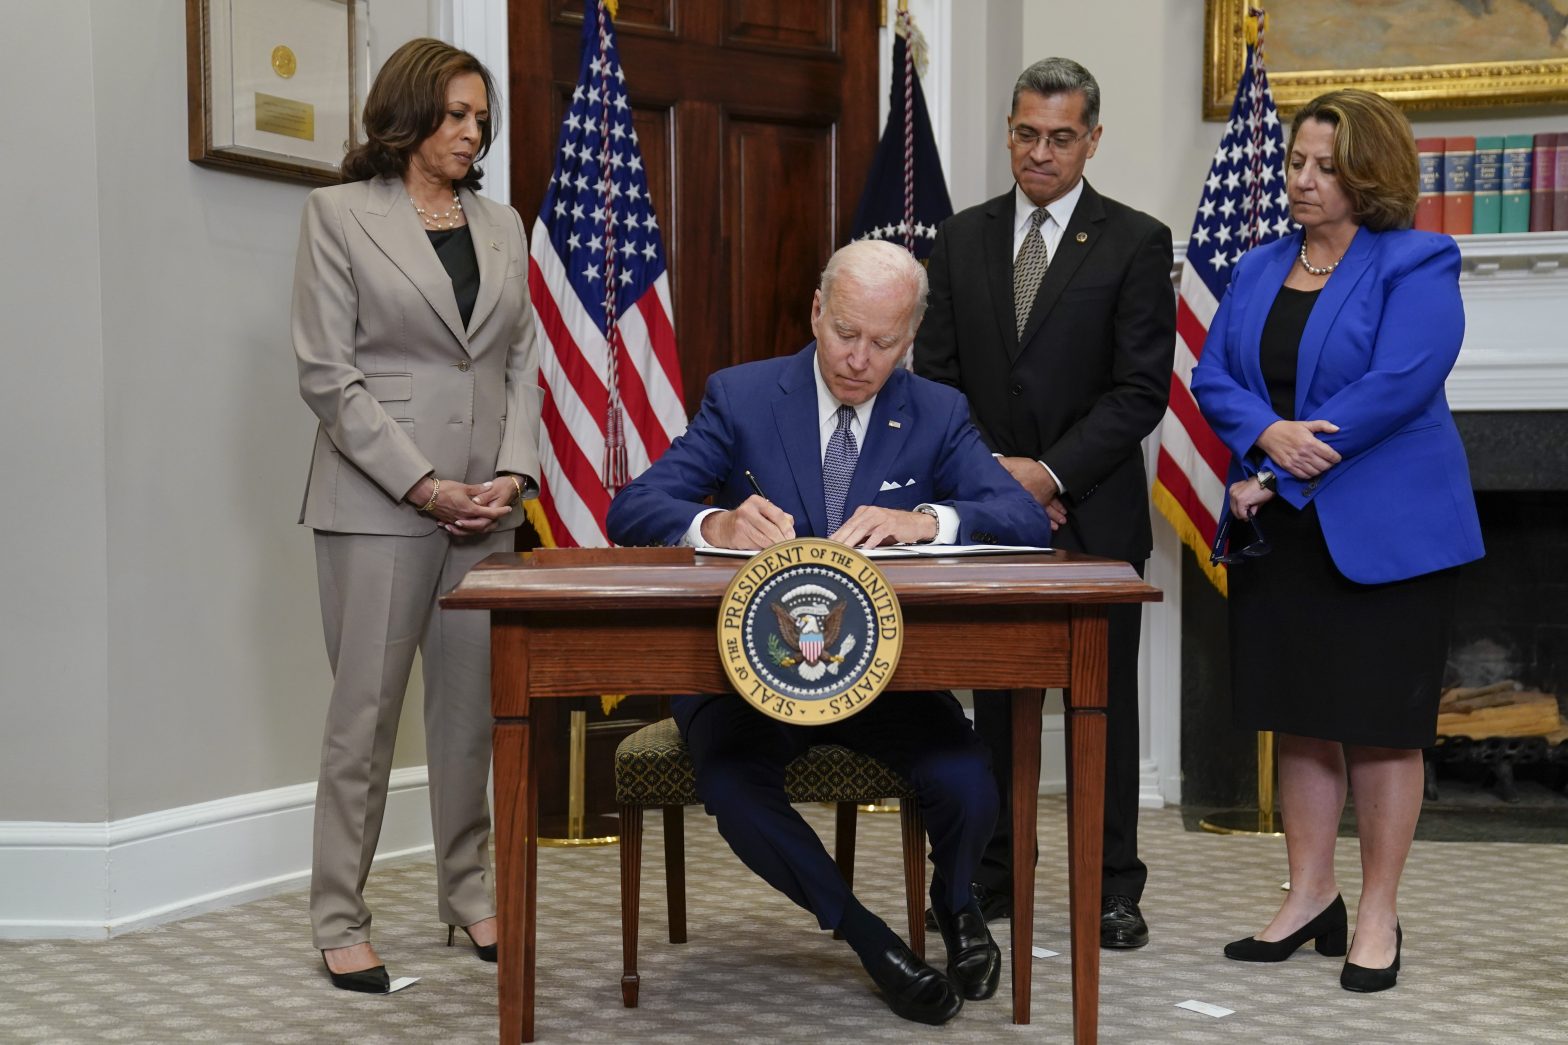 Biden Signs Order on Abortion Access After High Court Ruling